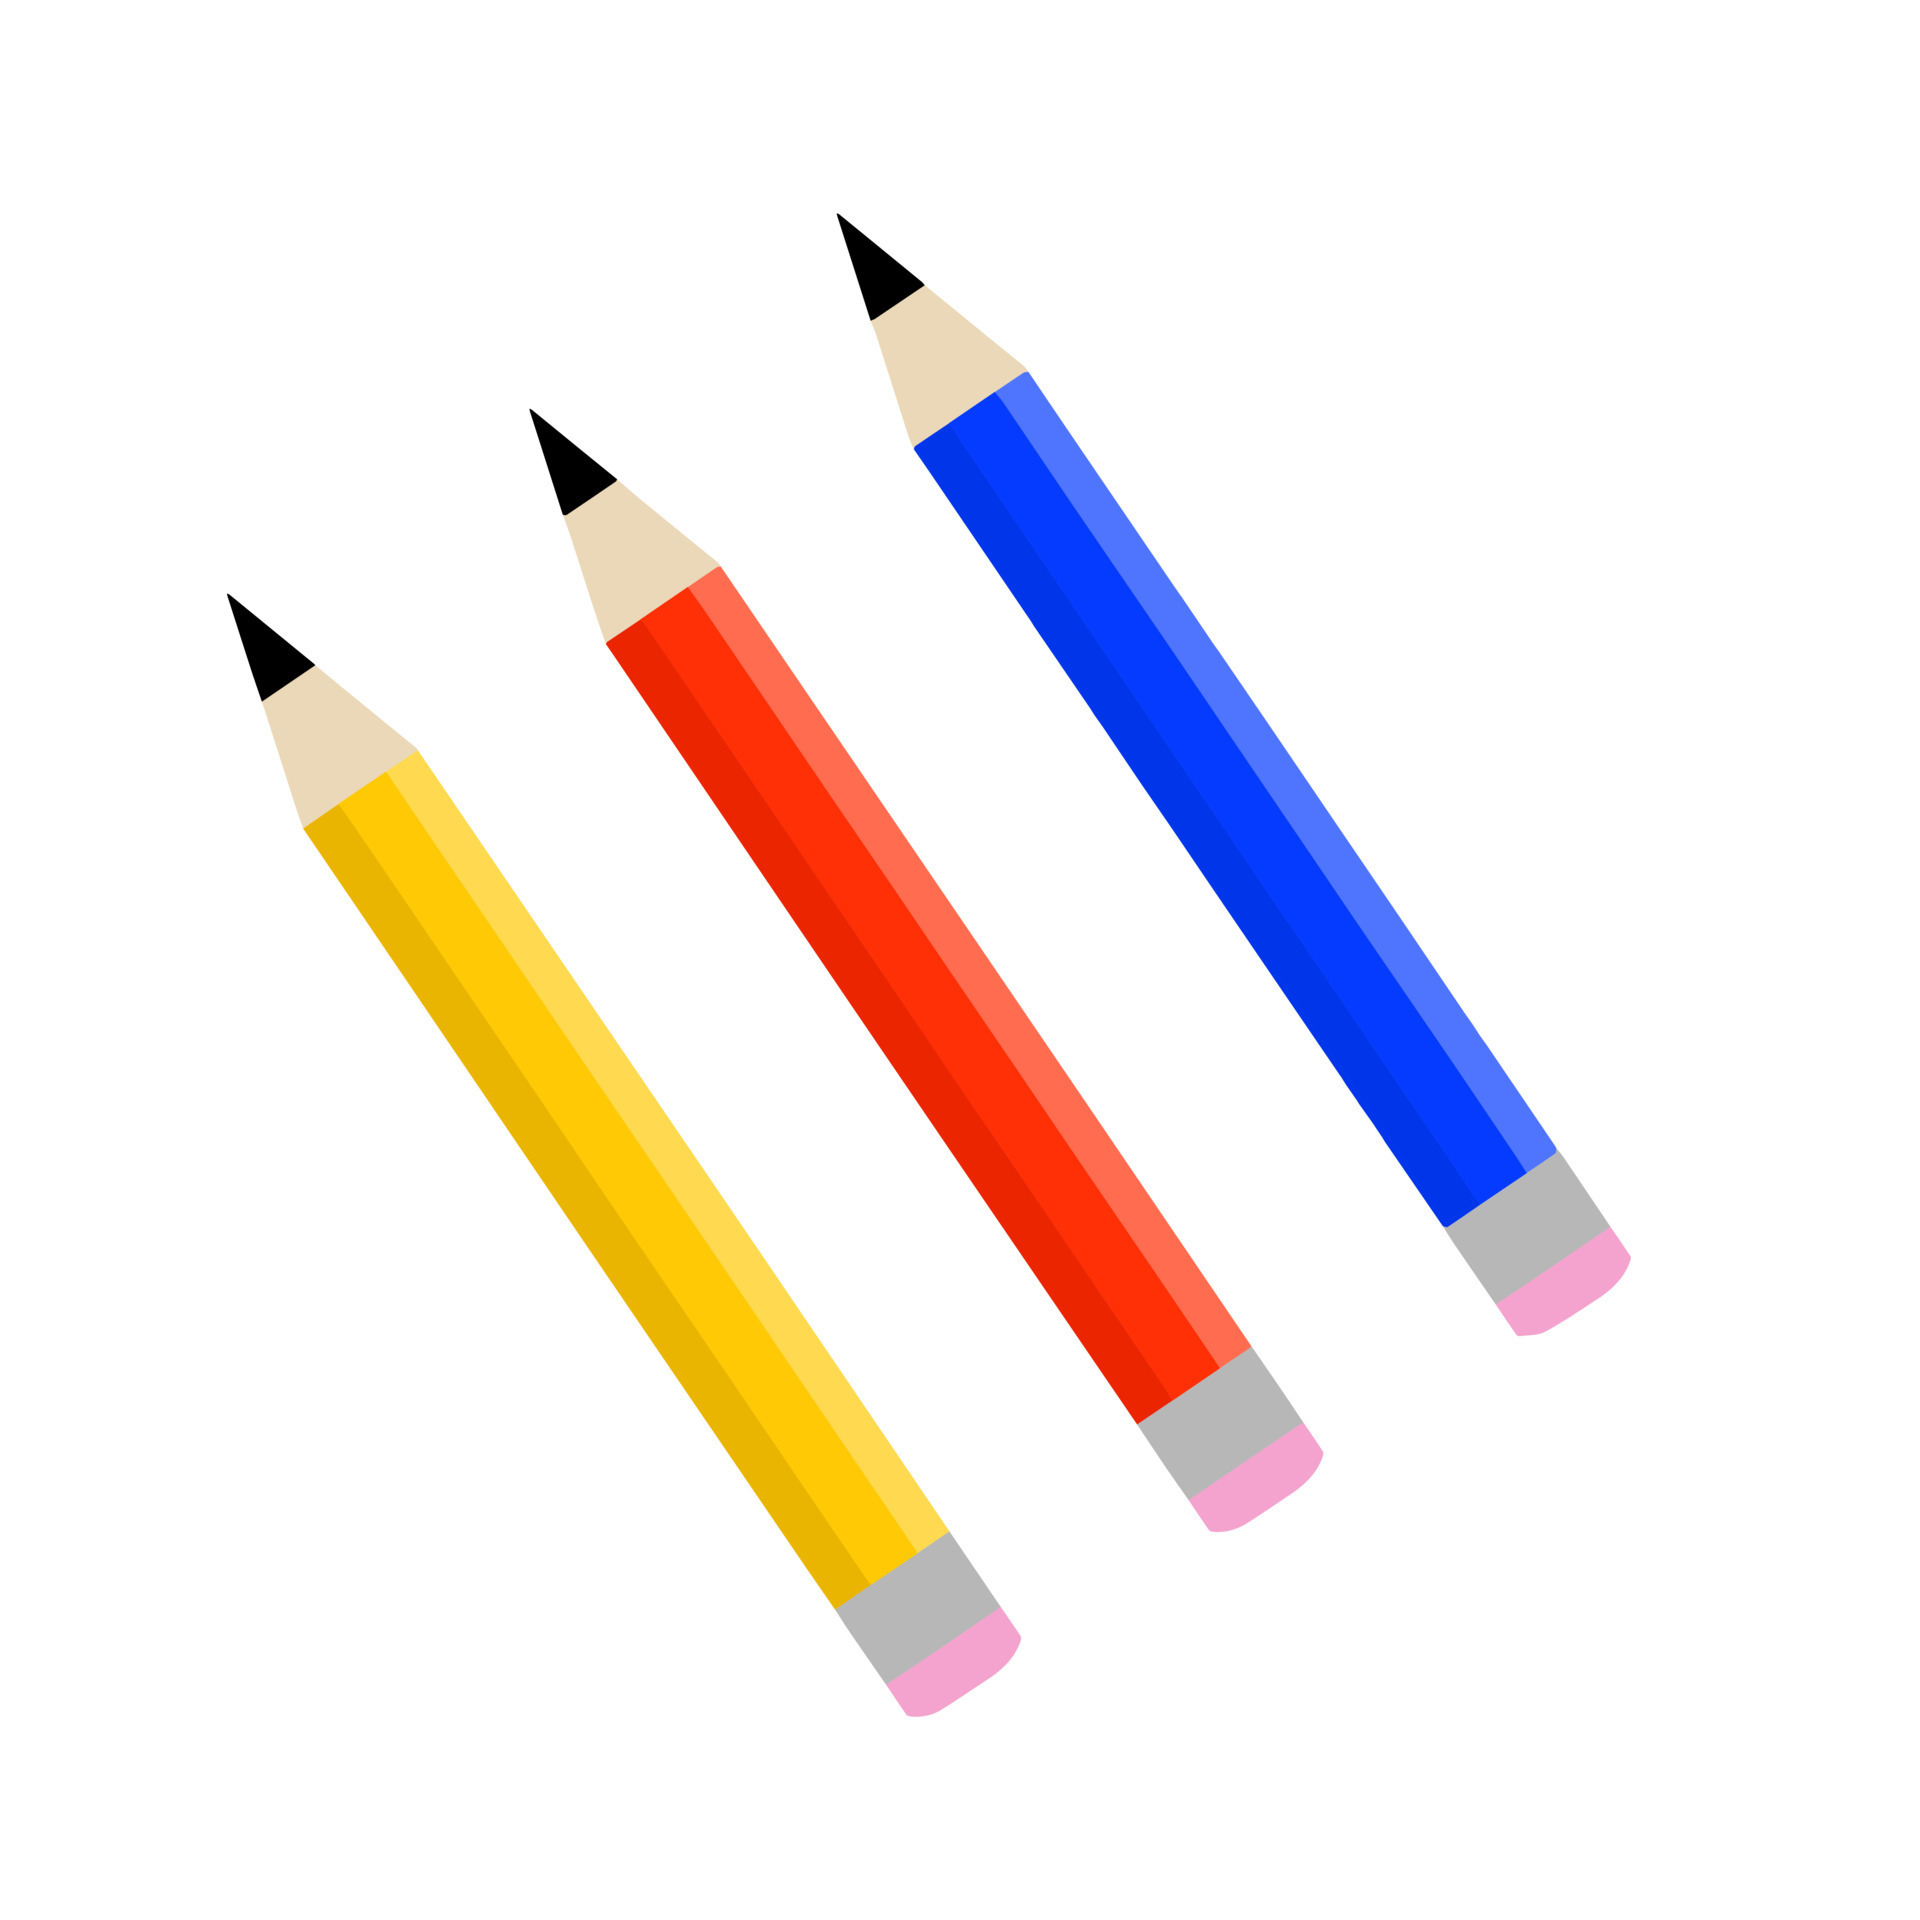 https://static.vecteezy.com/system/resources/previews/010/732/734/original/set-of-colored-pencils-icon-for-creativity-and-drawing-children-hobbies-and-entertainment-red-blue-and-yellow-stationery-flat-cartoon-free-vector.jpg